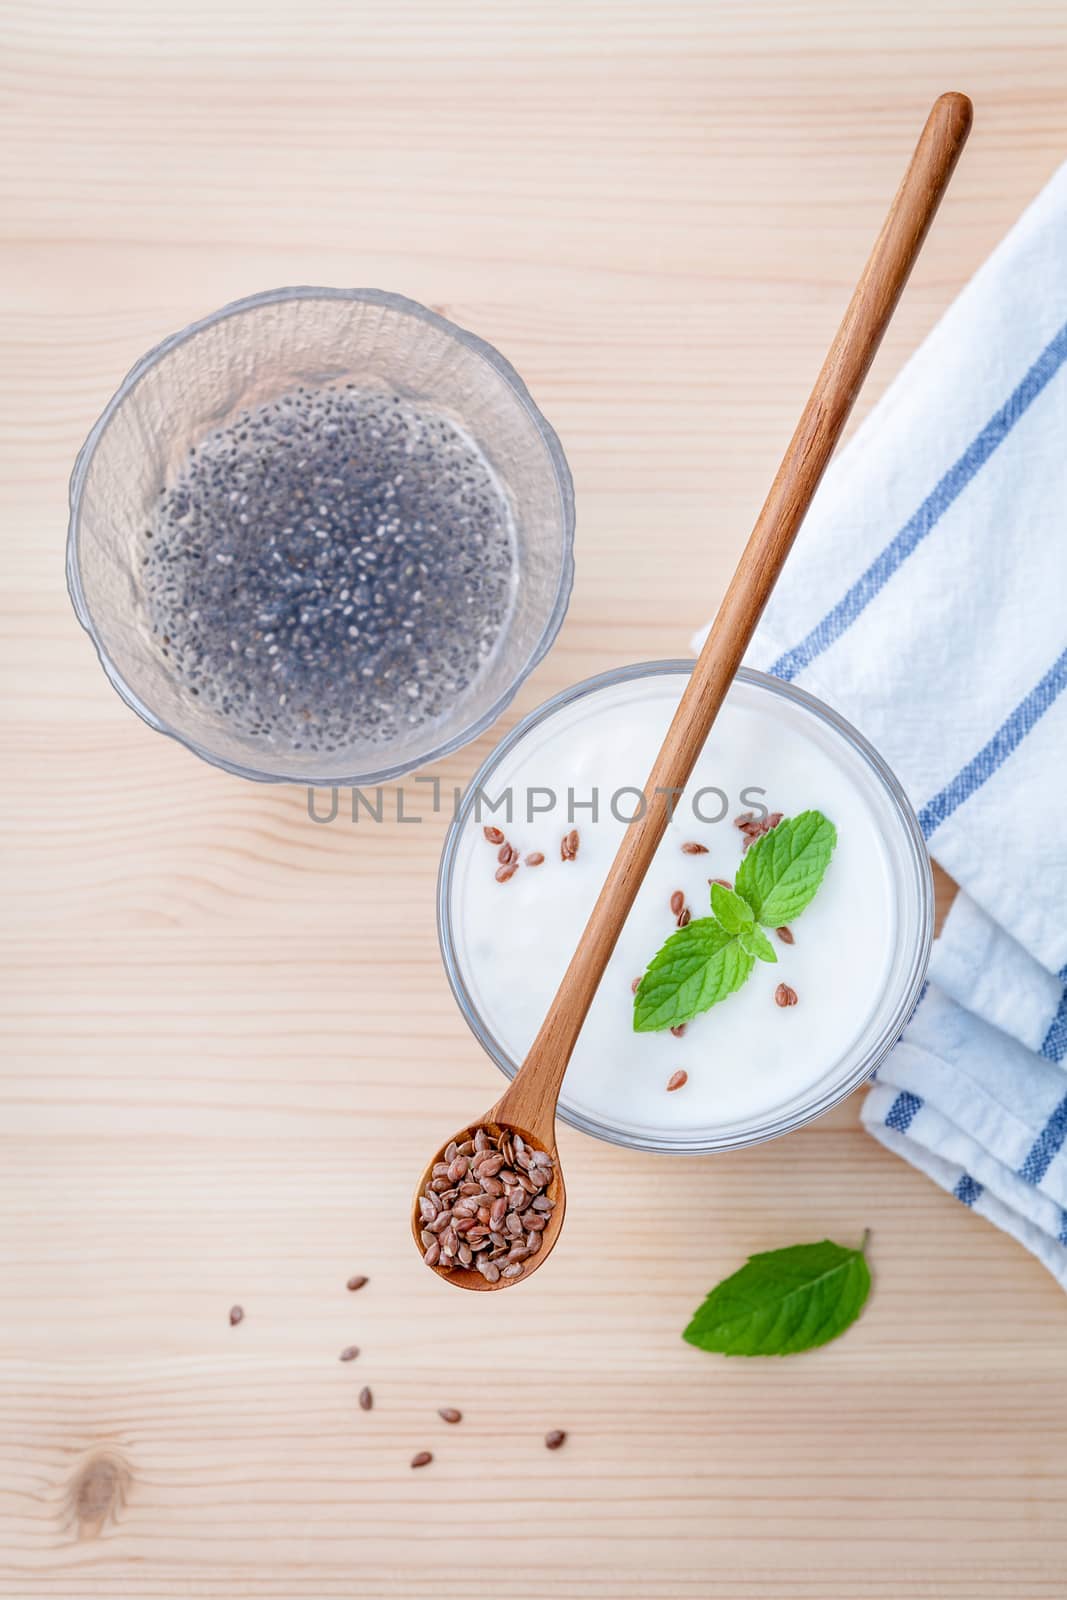 Nutritious flax seeds with glass of greek yogurt and wooden spoon for diet  meal setup on wooden background . shallow depth of field.